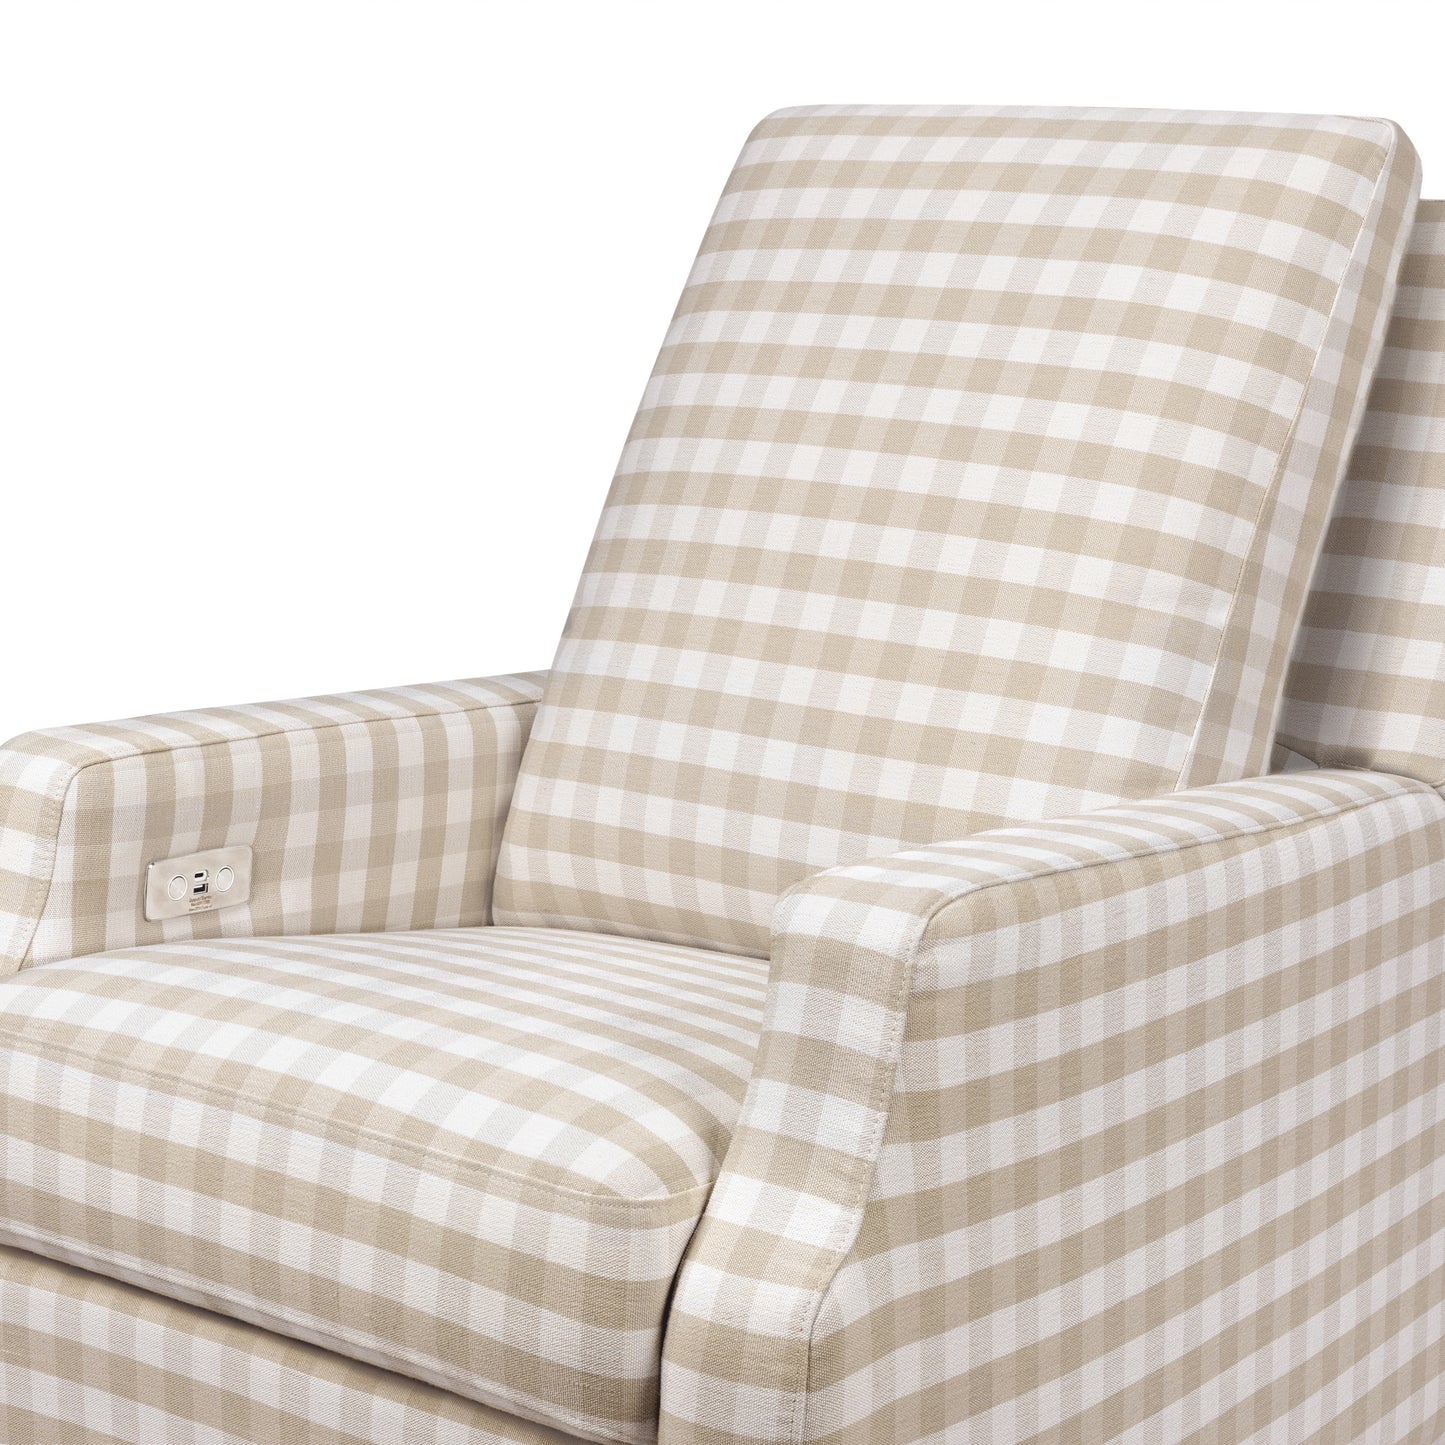 M22286TGHLB,Crewe Electronic Swivel Glider Recliner in Tan Gingham with Light Wood Base